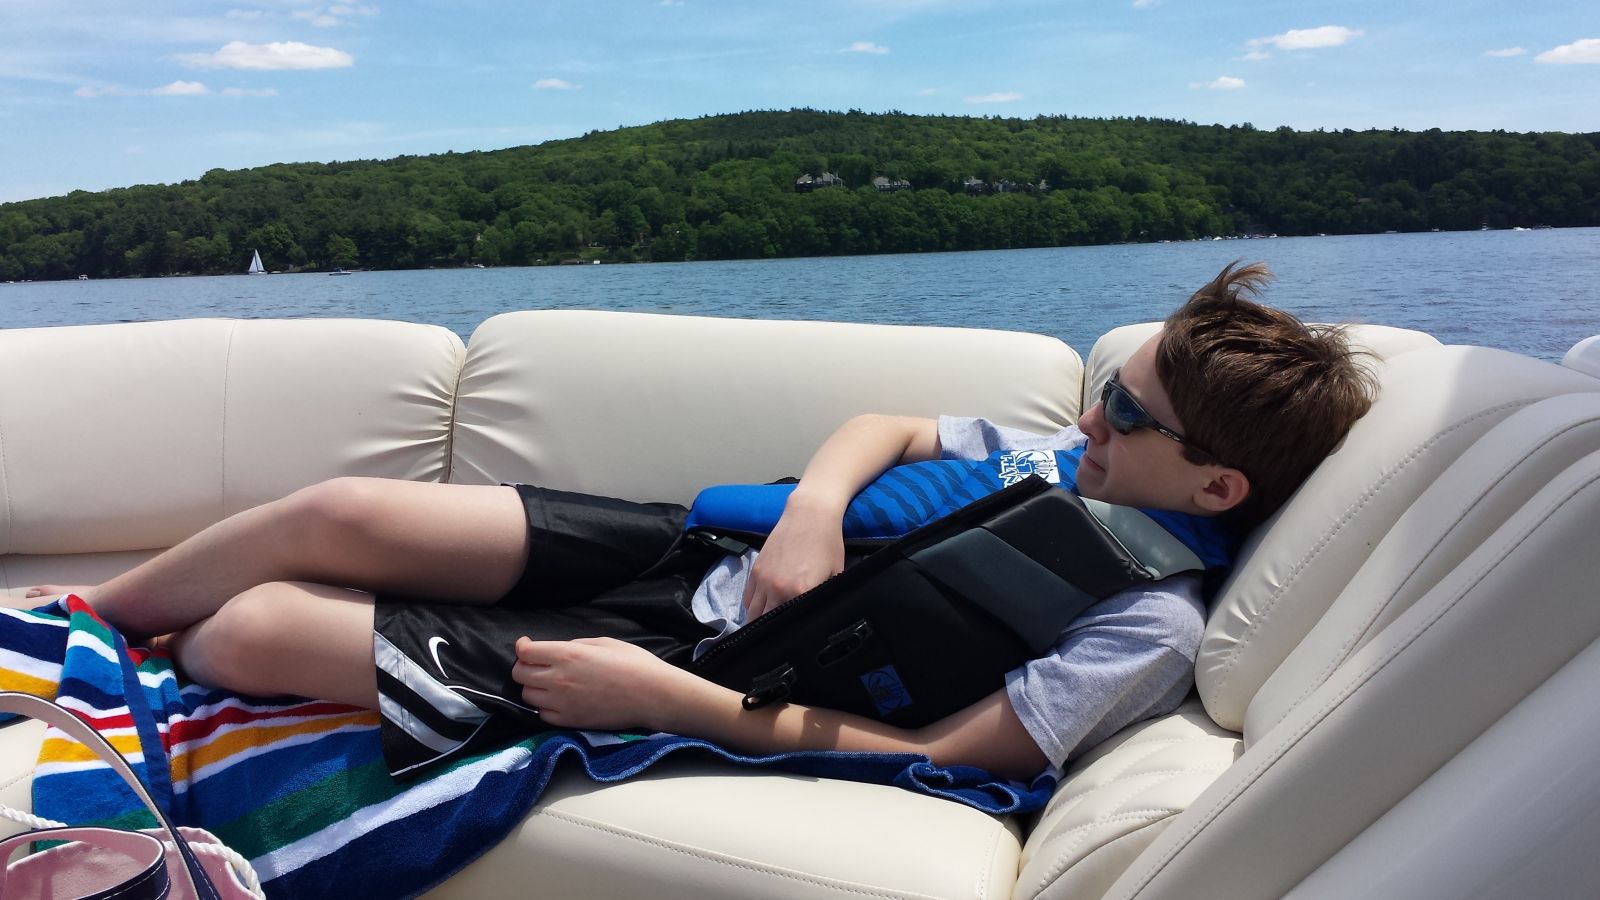 Nothing like a boat ride for a nap